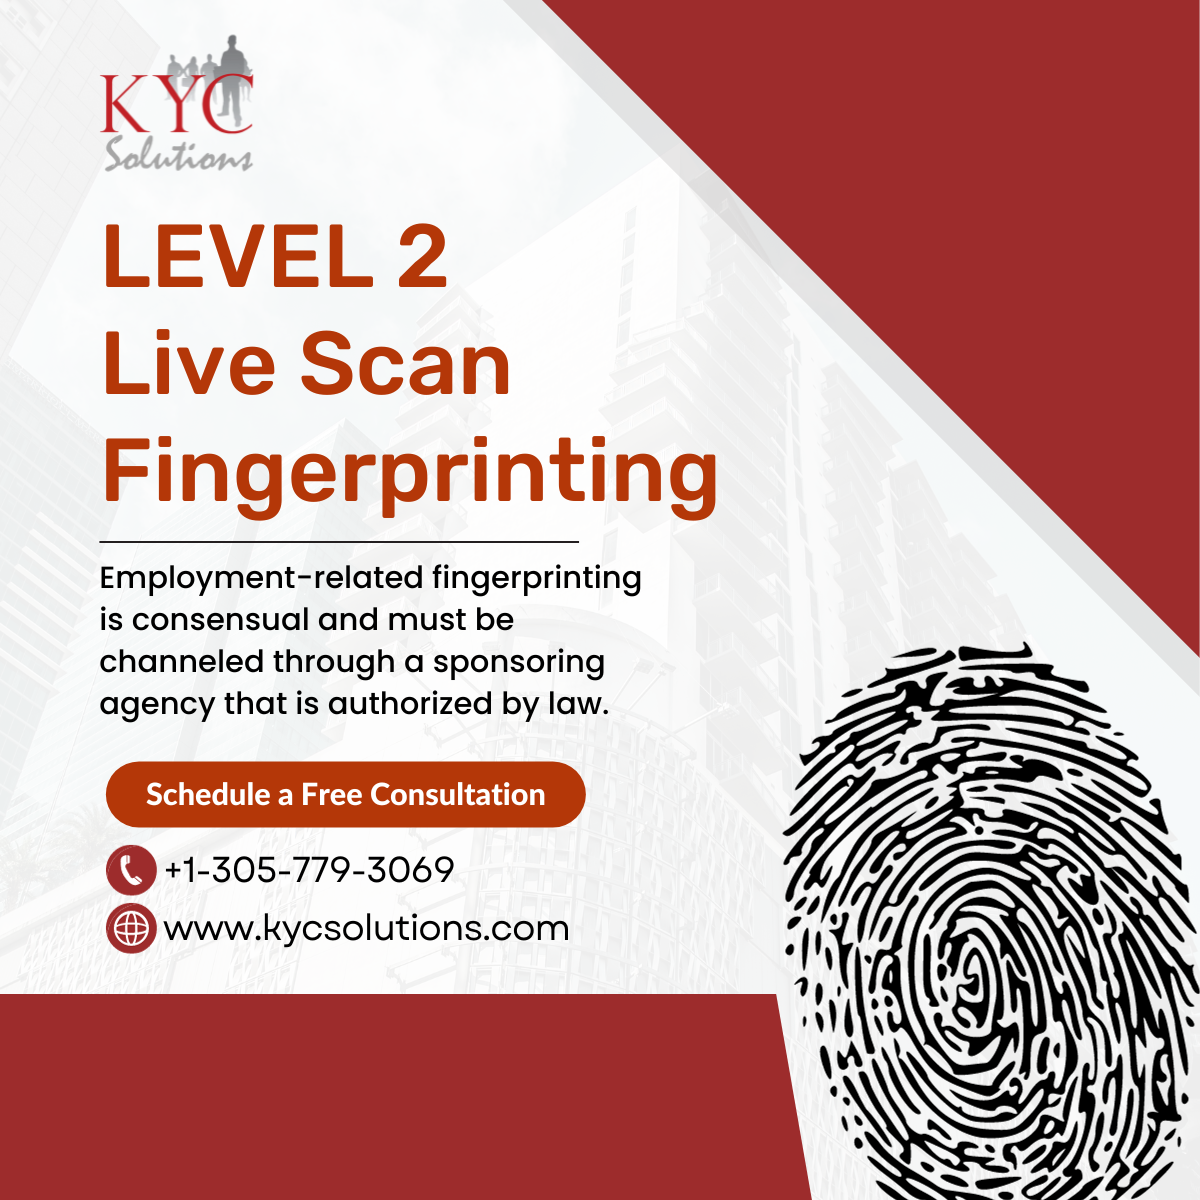 Inquesta Corporation | KYC Solutions live Scan fingerprinting for Florida Level 2 positions